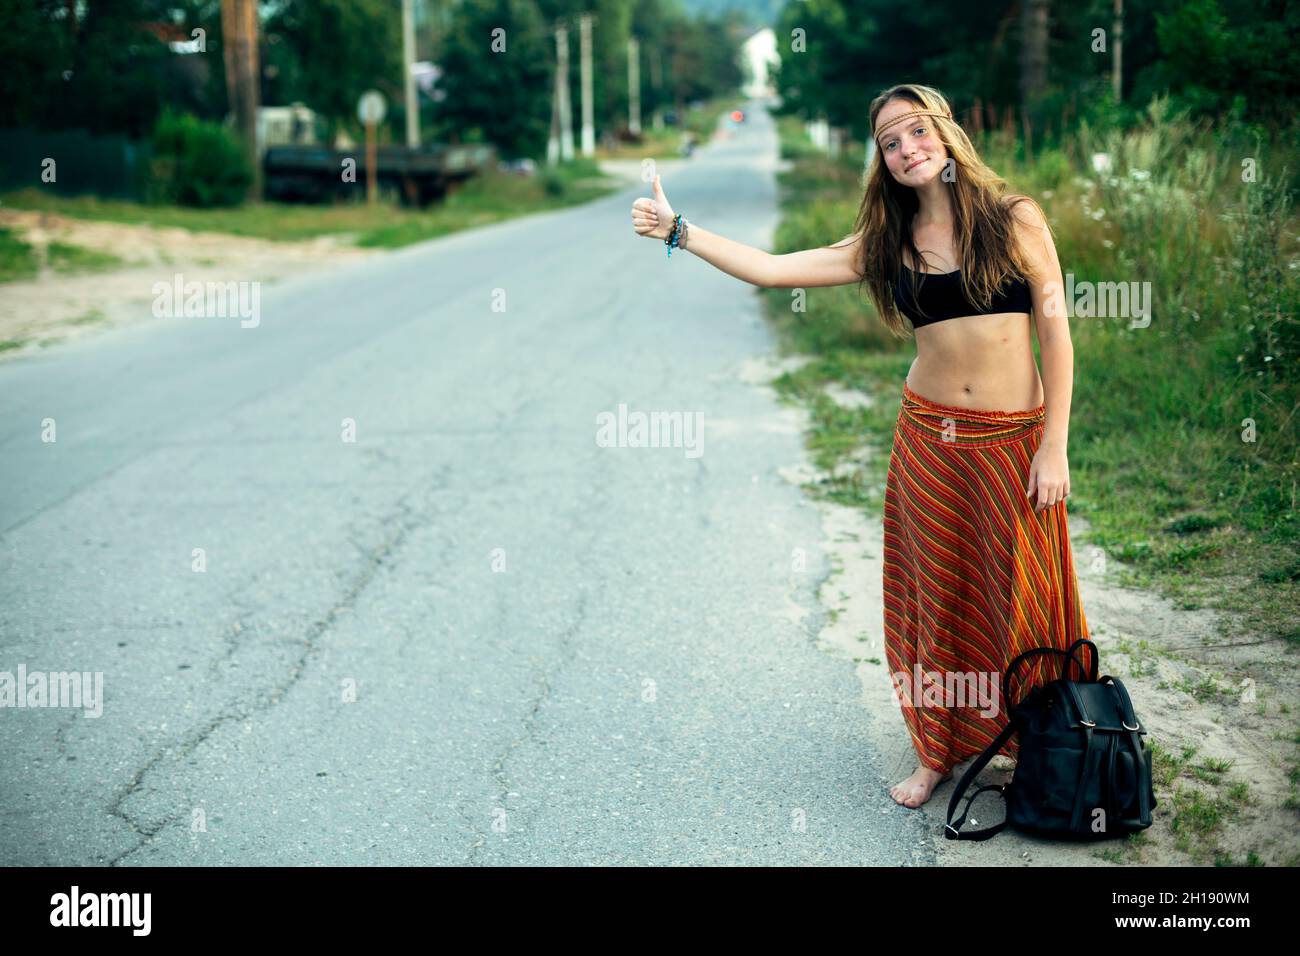 A hippie girl voting near the rural road. Hitchhiking trips. Stock Photo